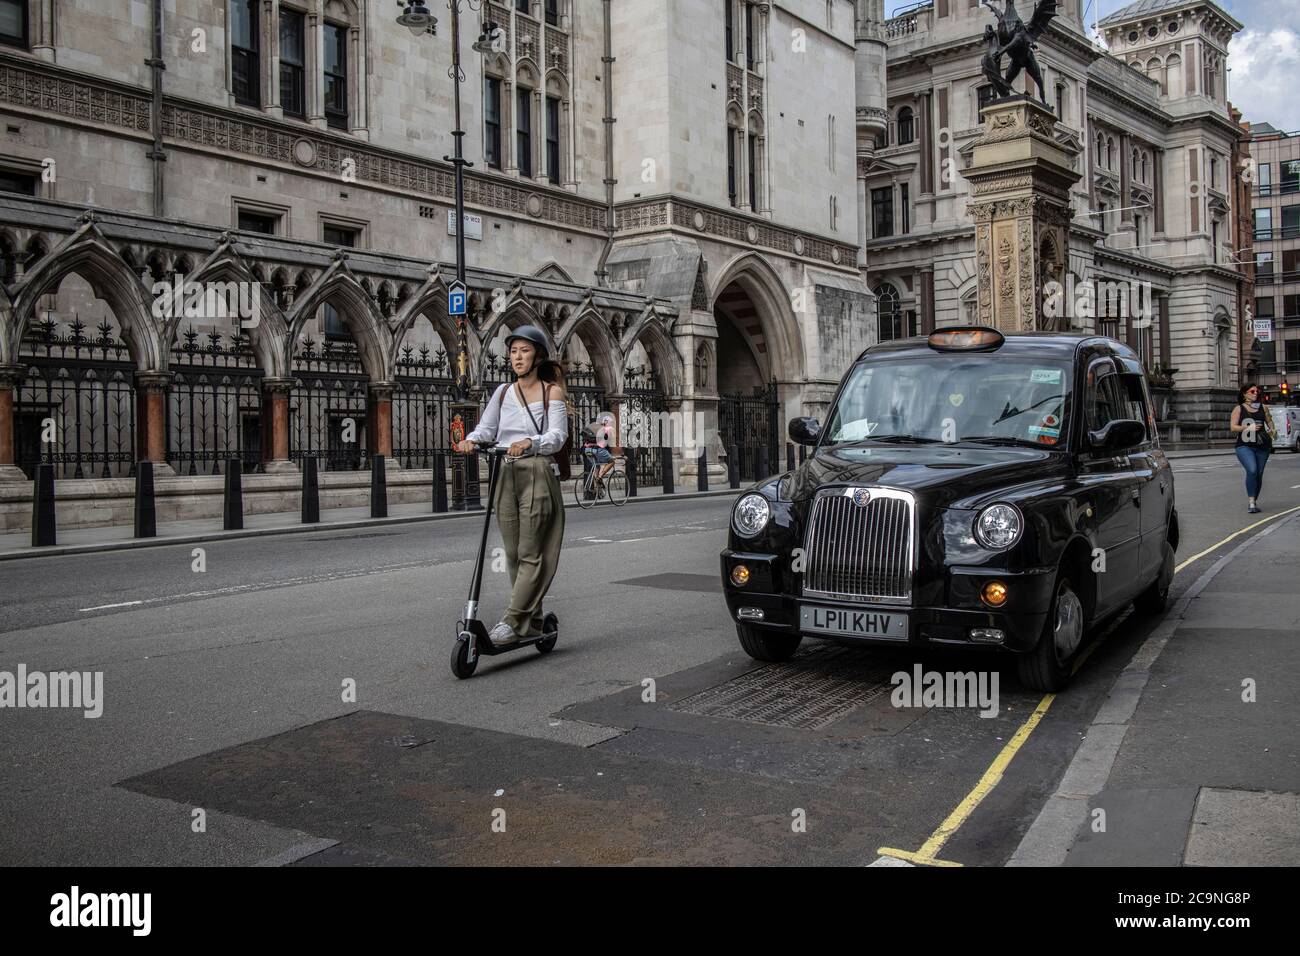 Woman travelling along the road on Fleet Street on a electric scooter past a London black cab, City of London, United Kingdom Stock Photo